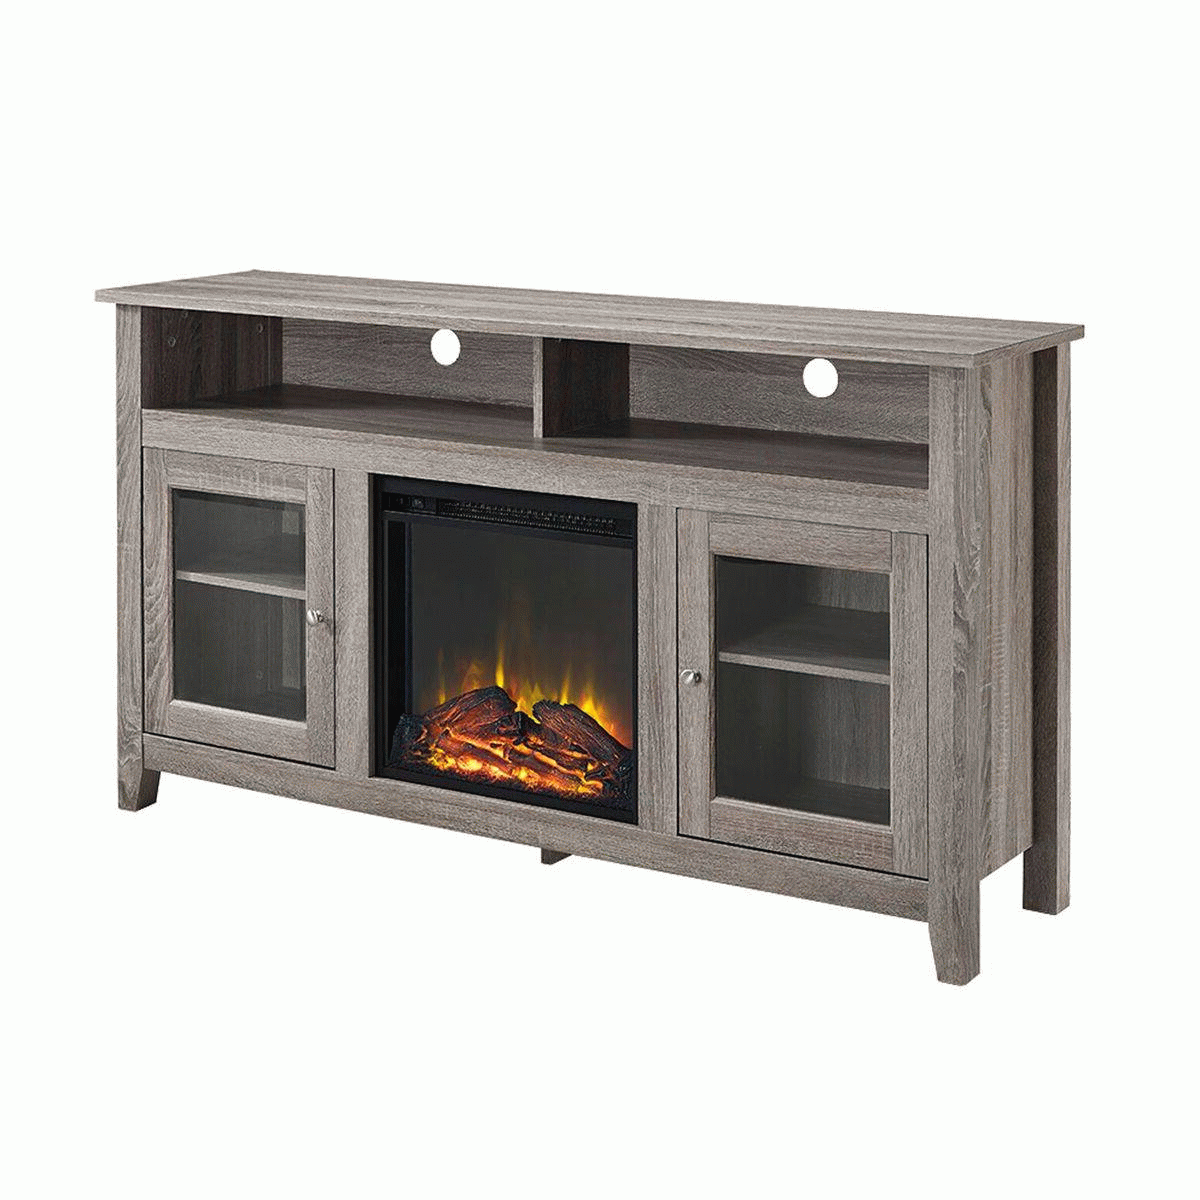 58" Wood Highboy Fireplace Tv Stand – Driftwood – Walker Edison W58fp18hbag Within Wood Highboy Fireplace Tv Stands (View 4 of 20)